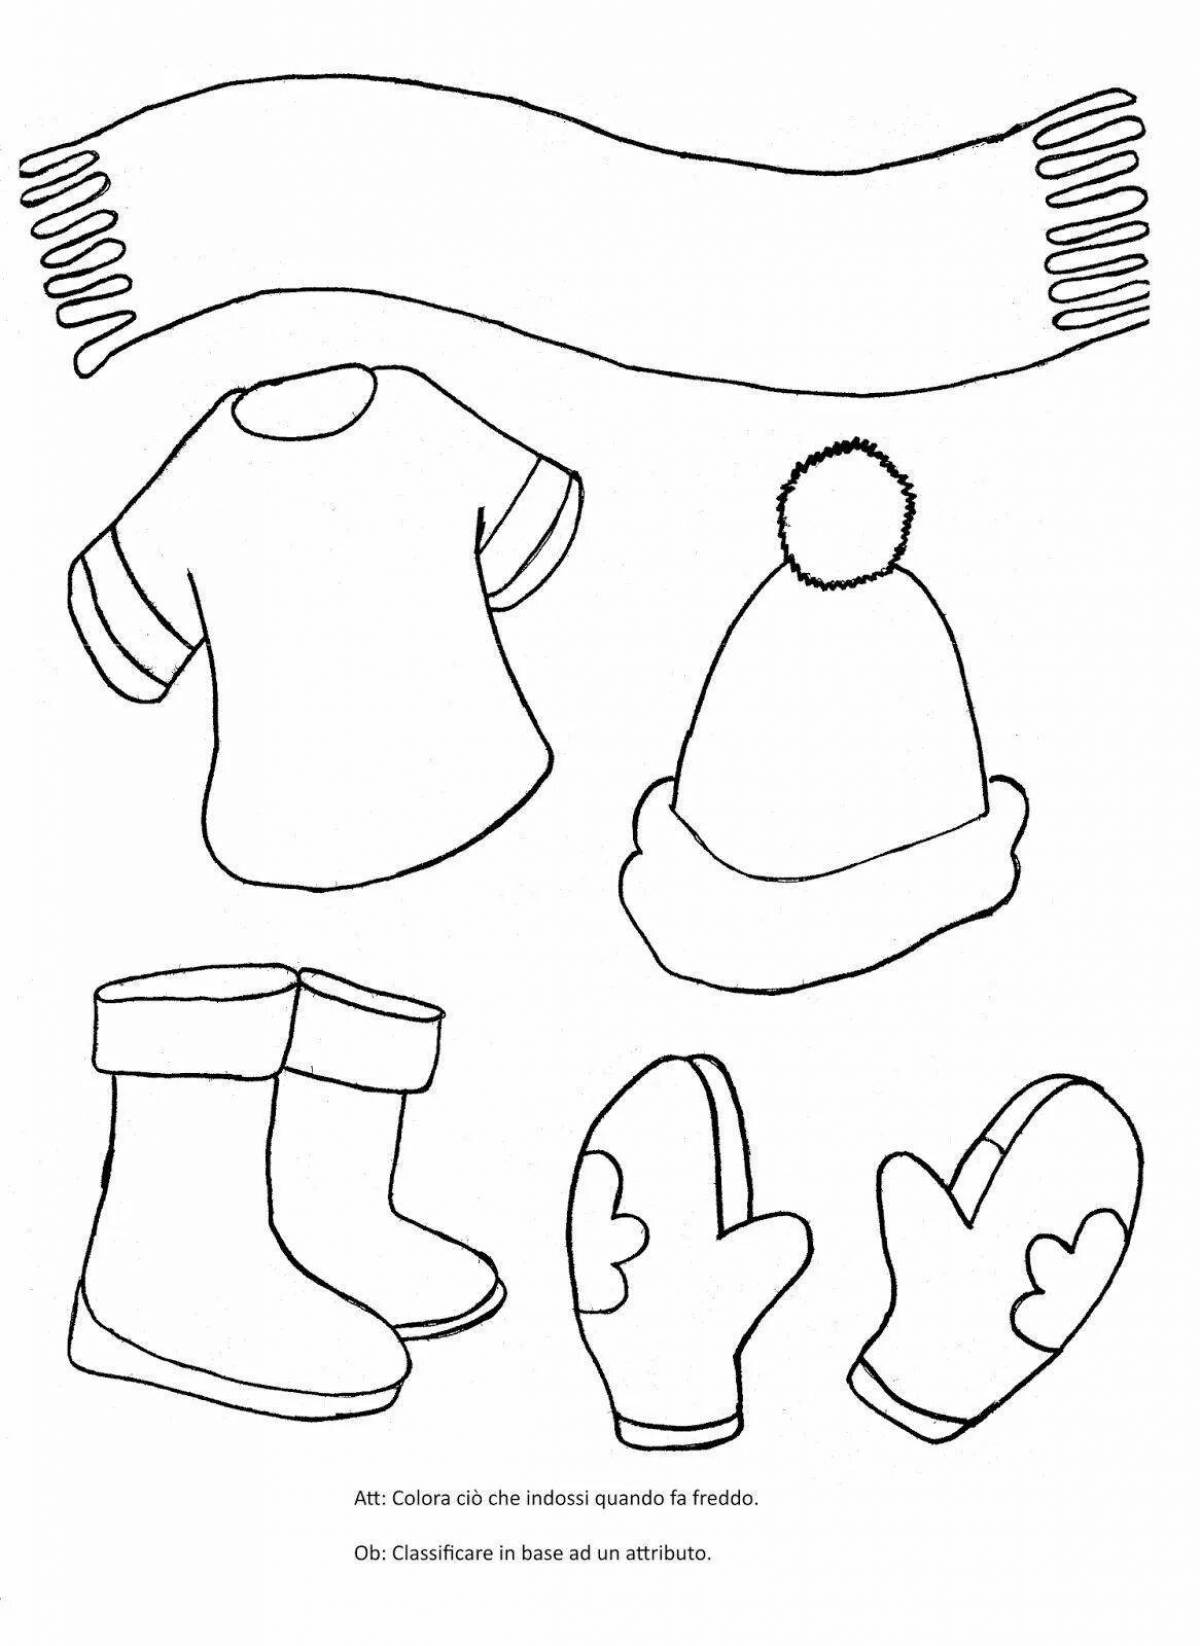 Shiny pre-k winter clothes coloring page